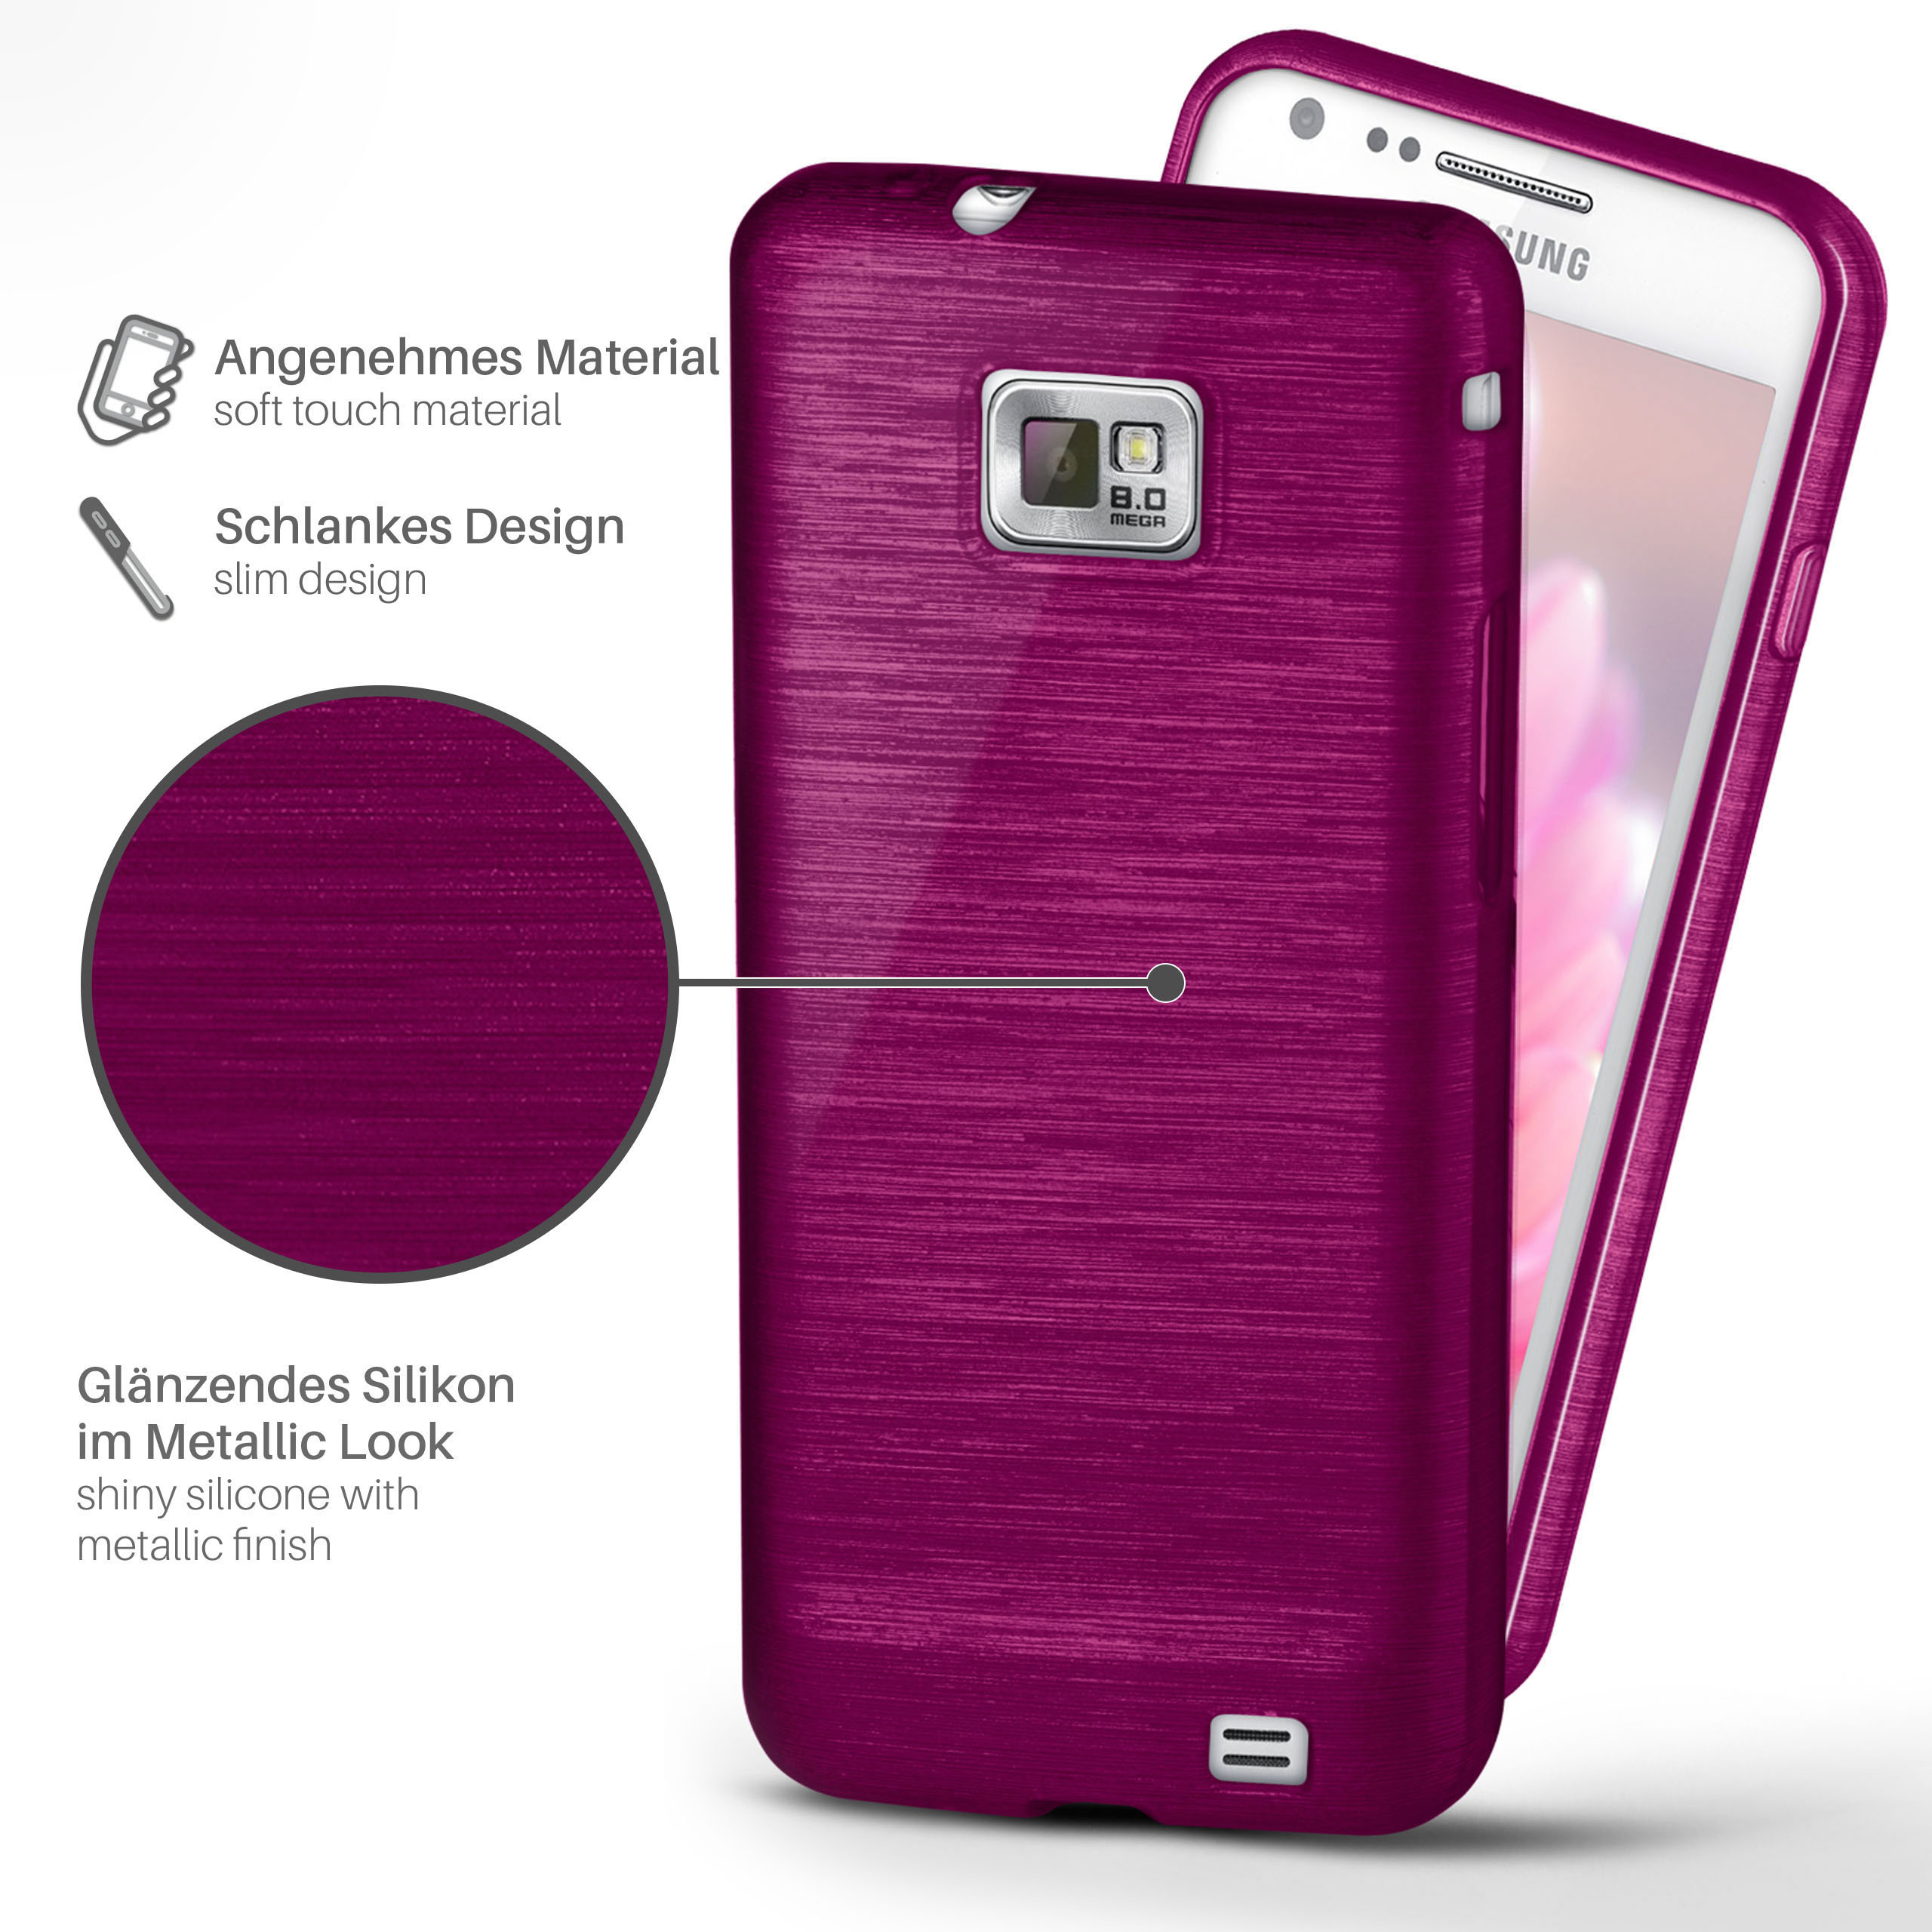 MOEX Plus, Case, Galaxy S2 Samsung, Purpure-Purple / S2 Backcover, Brushed